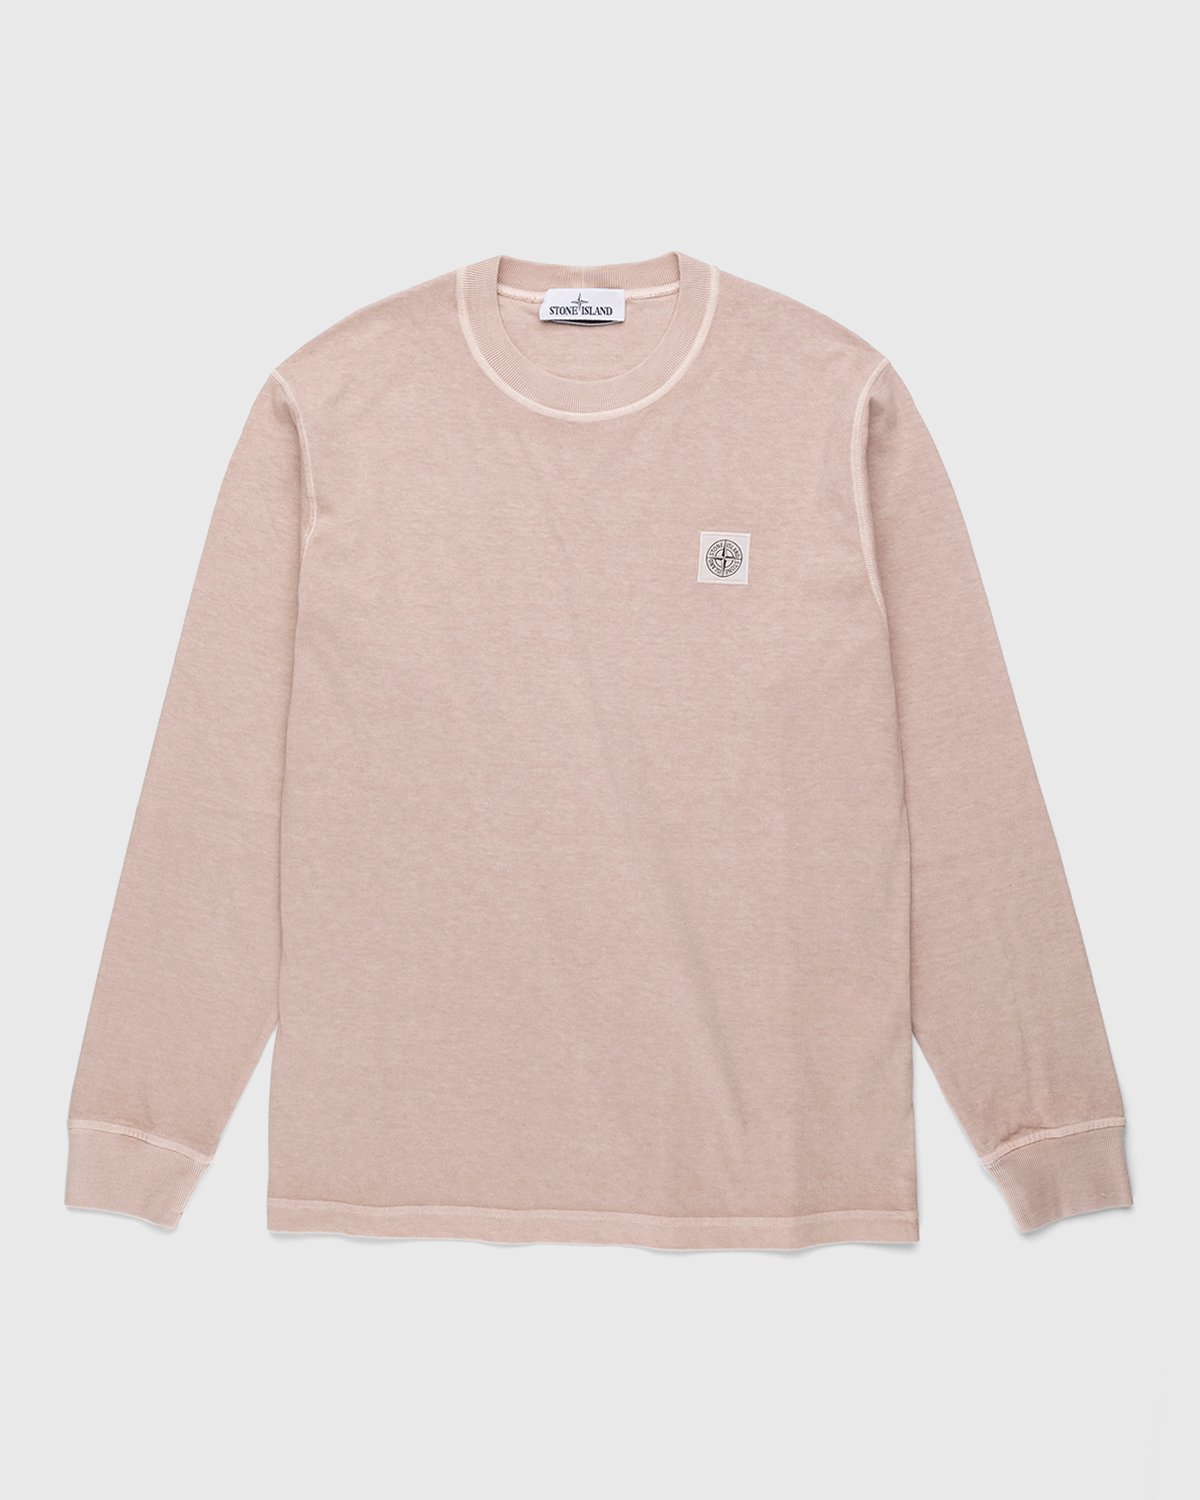 Stone Island - T-Shirt Rustic Rose - Clothing - Red - Image 1